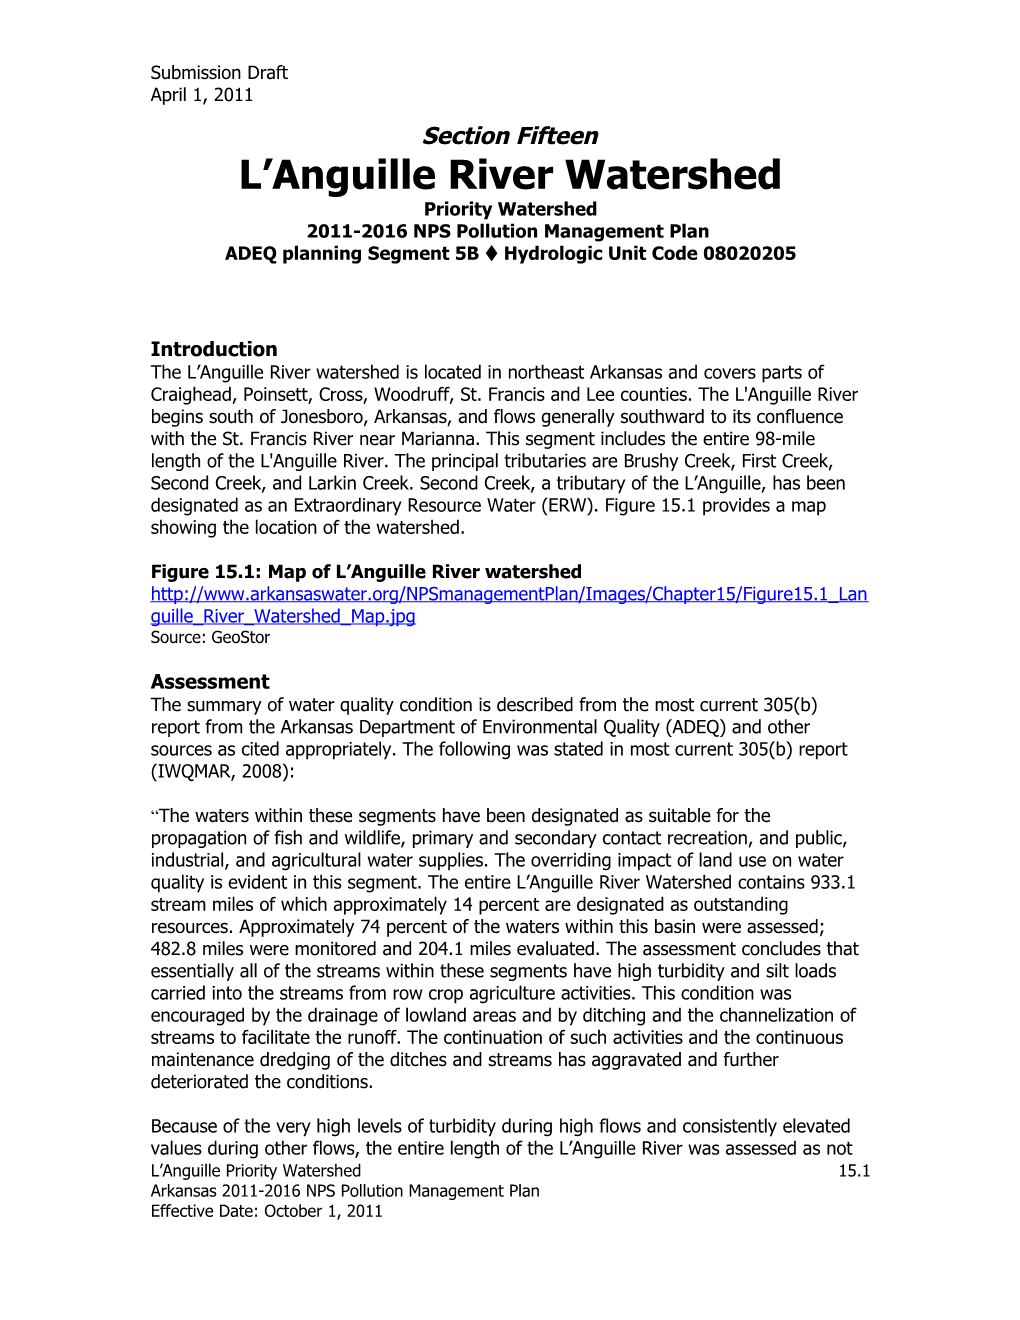 L Anguille River Watershed